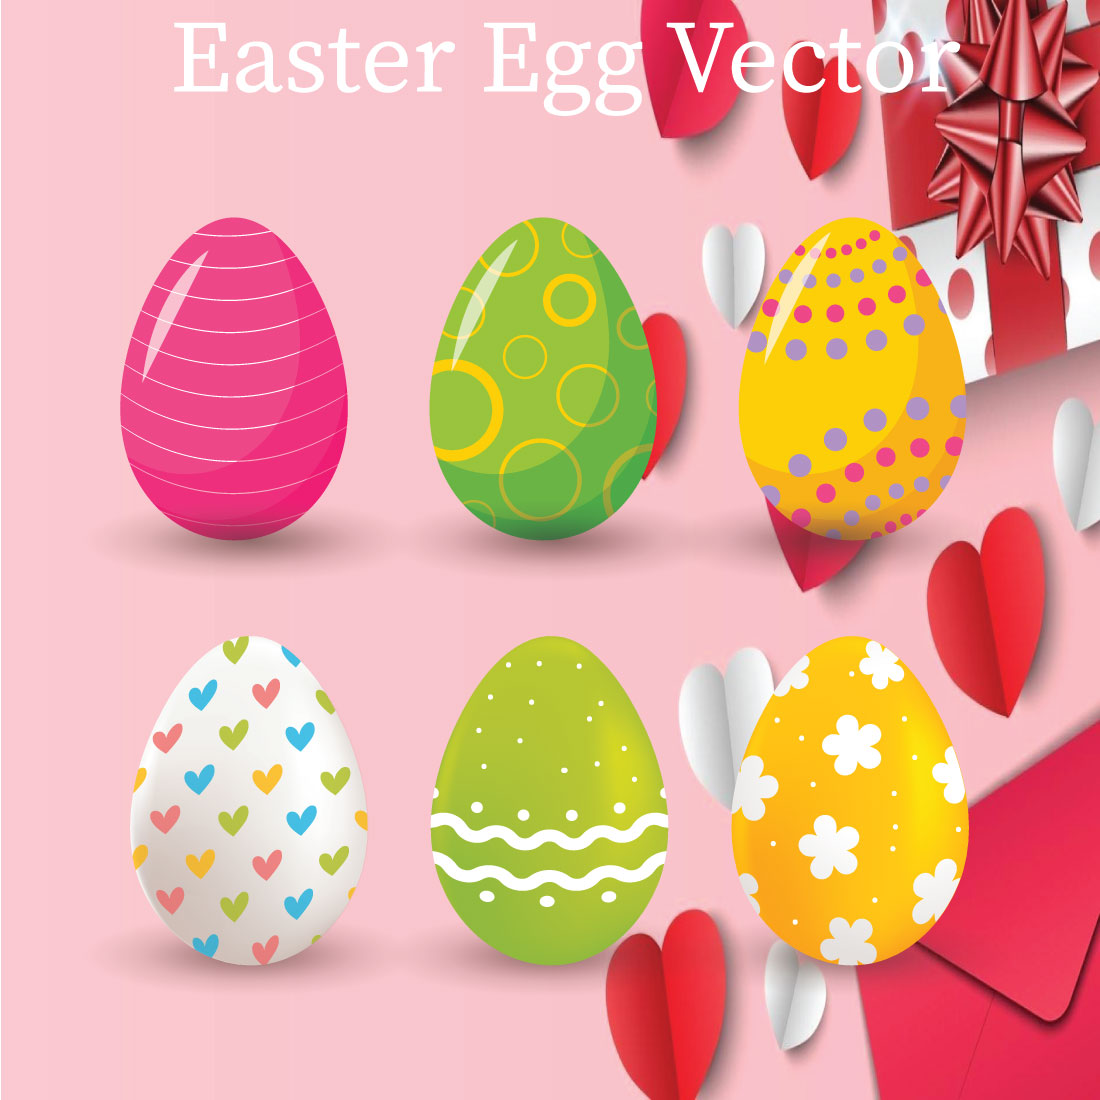 Cute Easter Egg Vector preview image.